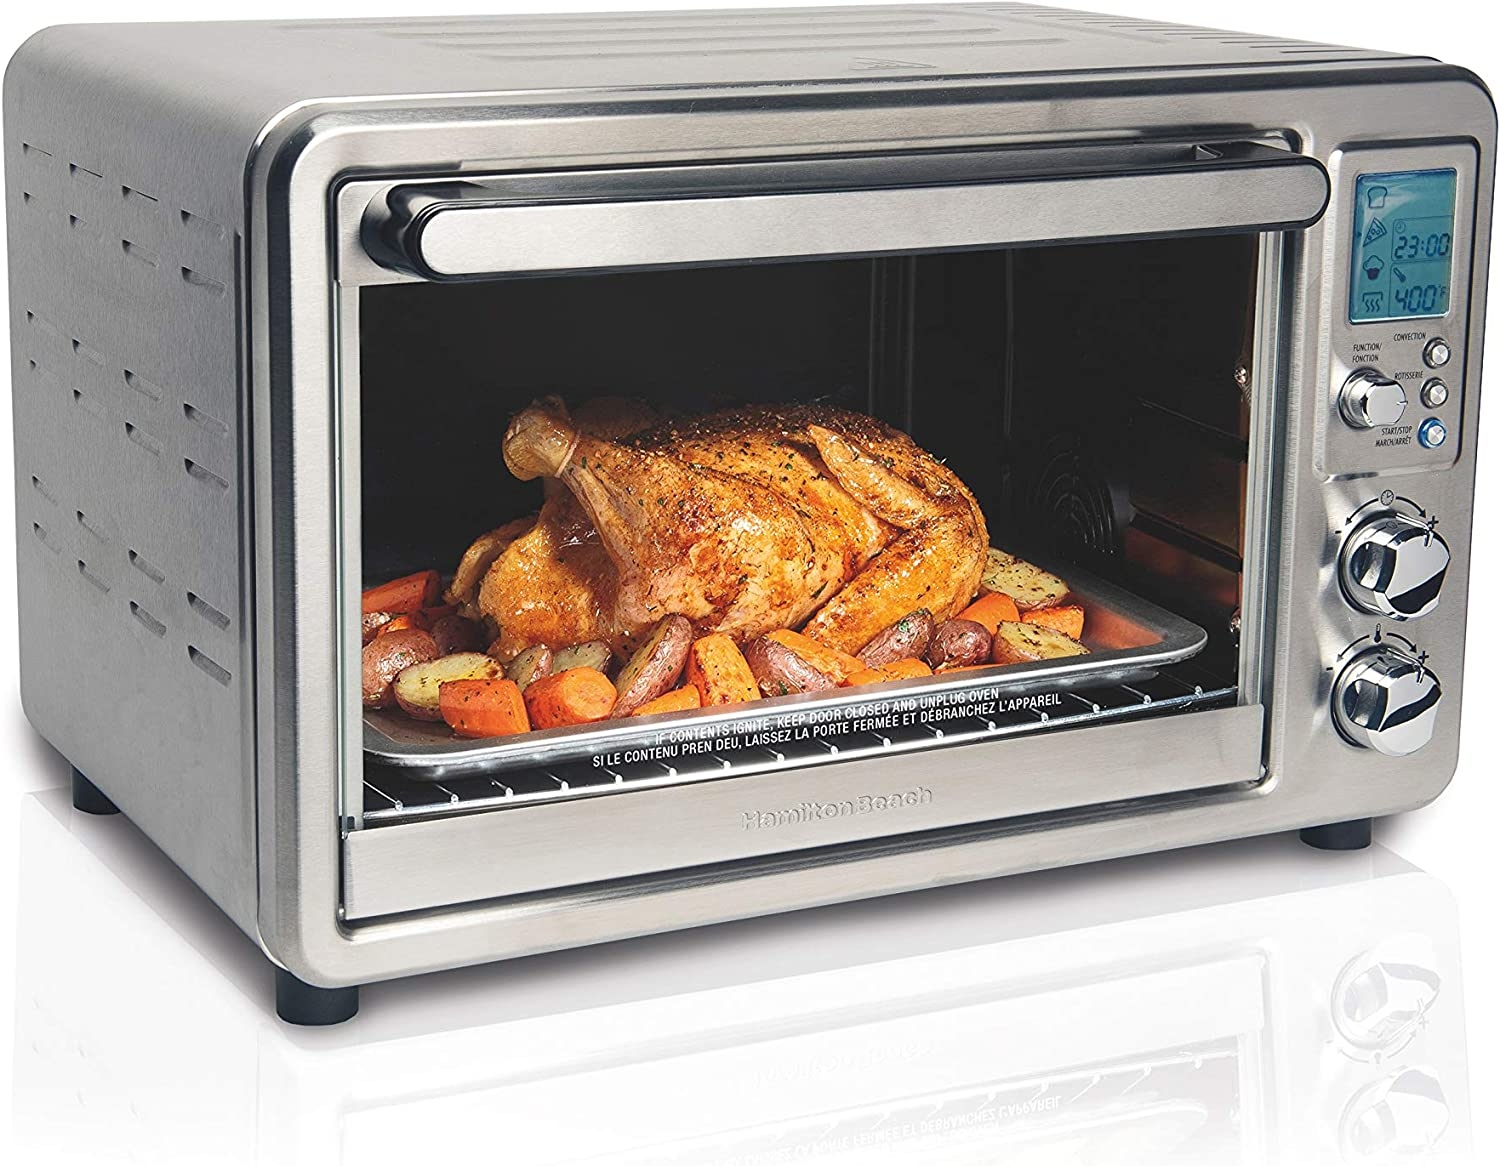 Hamilton Beach 31190C Digital Display Countertop Convection Toaster Oven with Rotisserie, Large 6-Slice, Stainless Steel Import